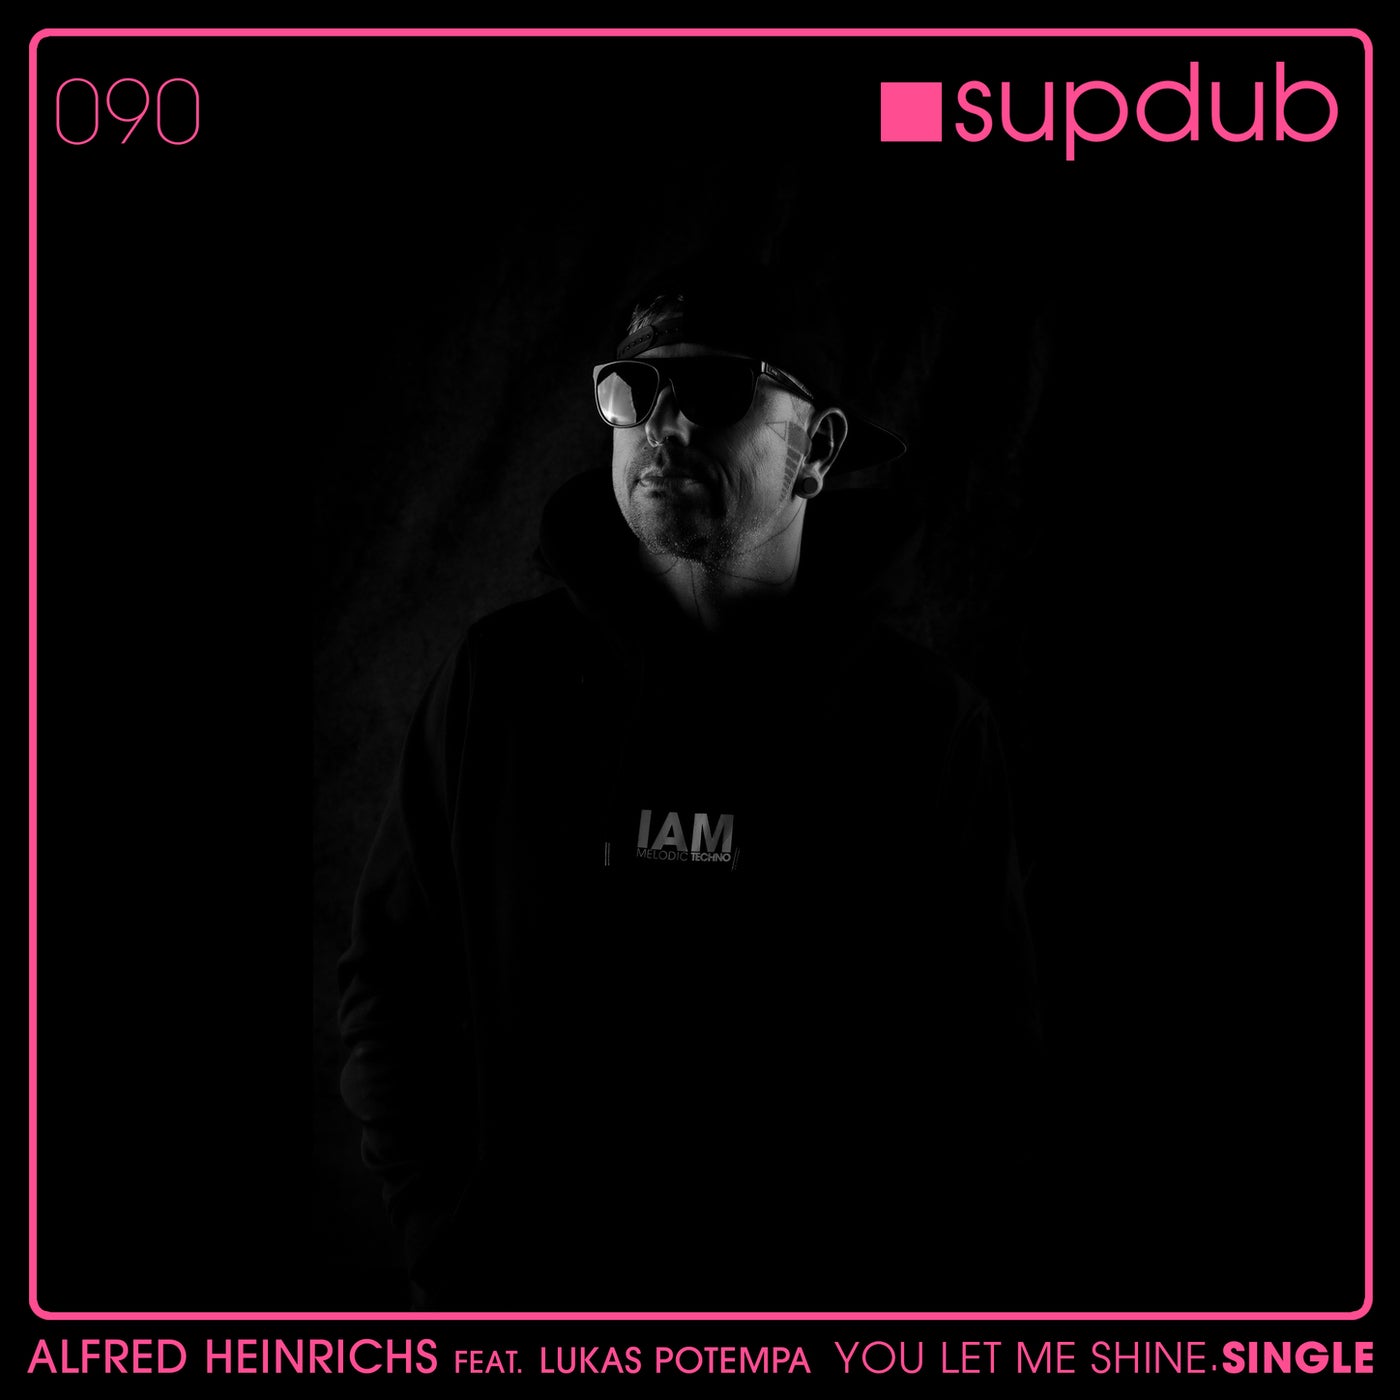 Alfred Heinrichs – You Let Me Shine feat. Lukas Potempa [SDR090]